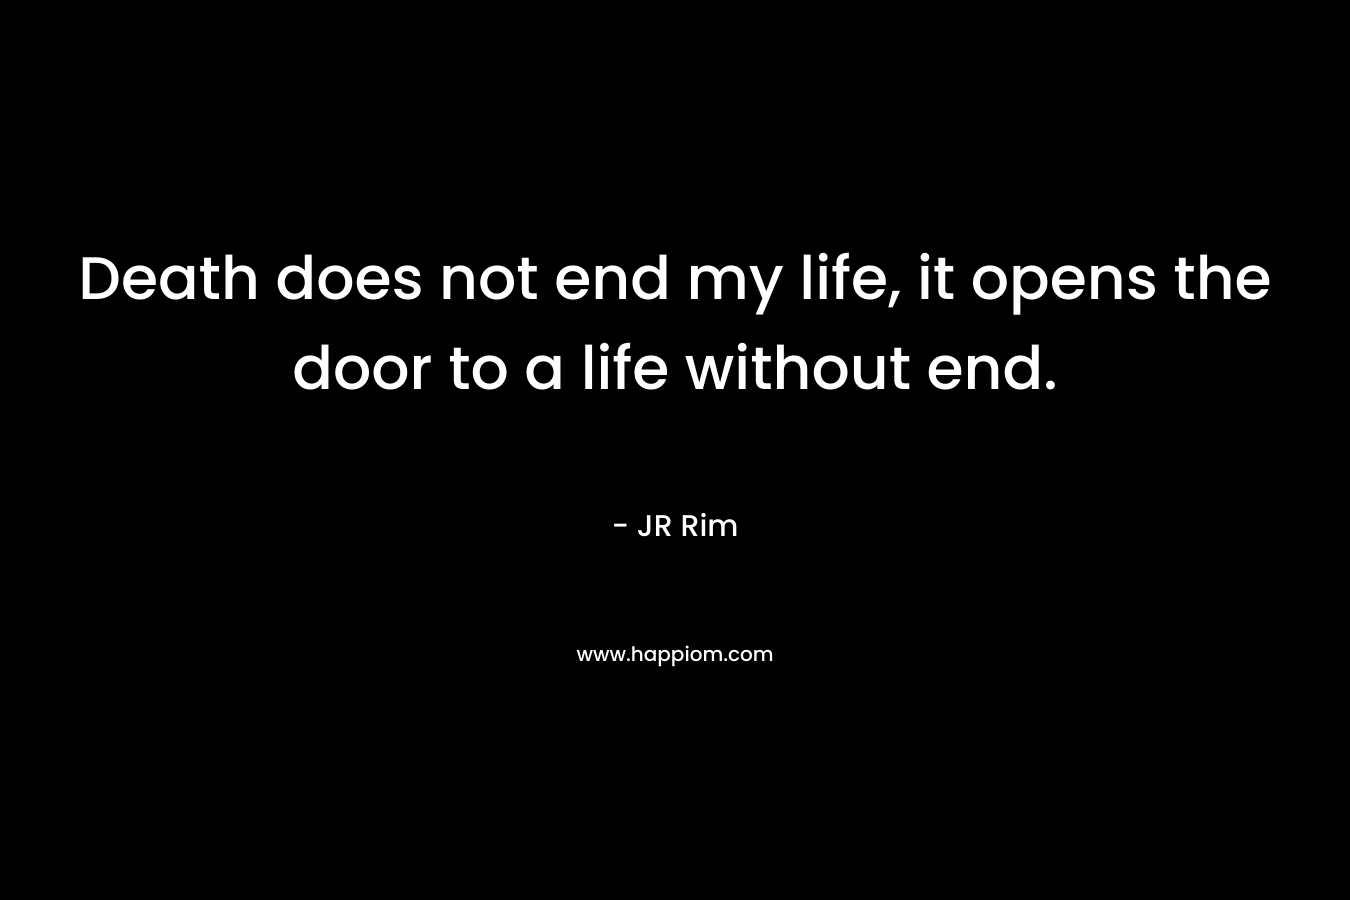 Death does not end my life, it opens the door to a life without end.